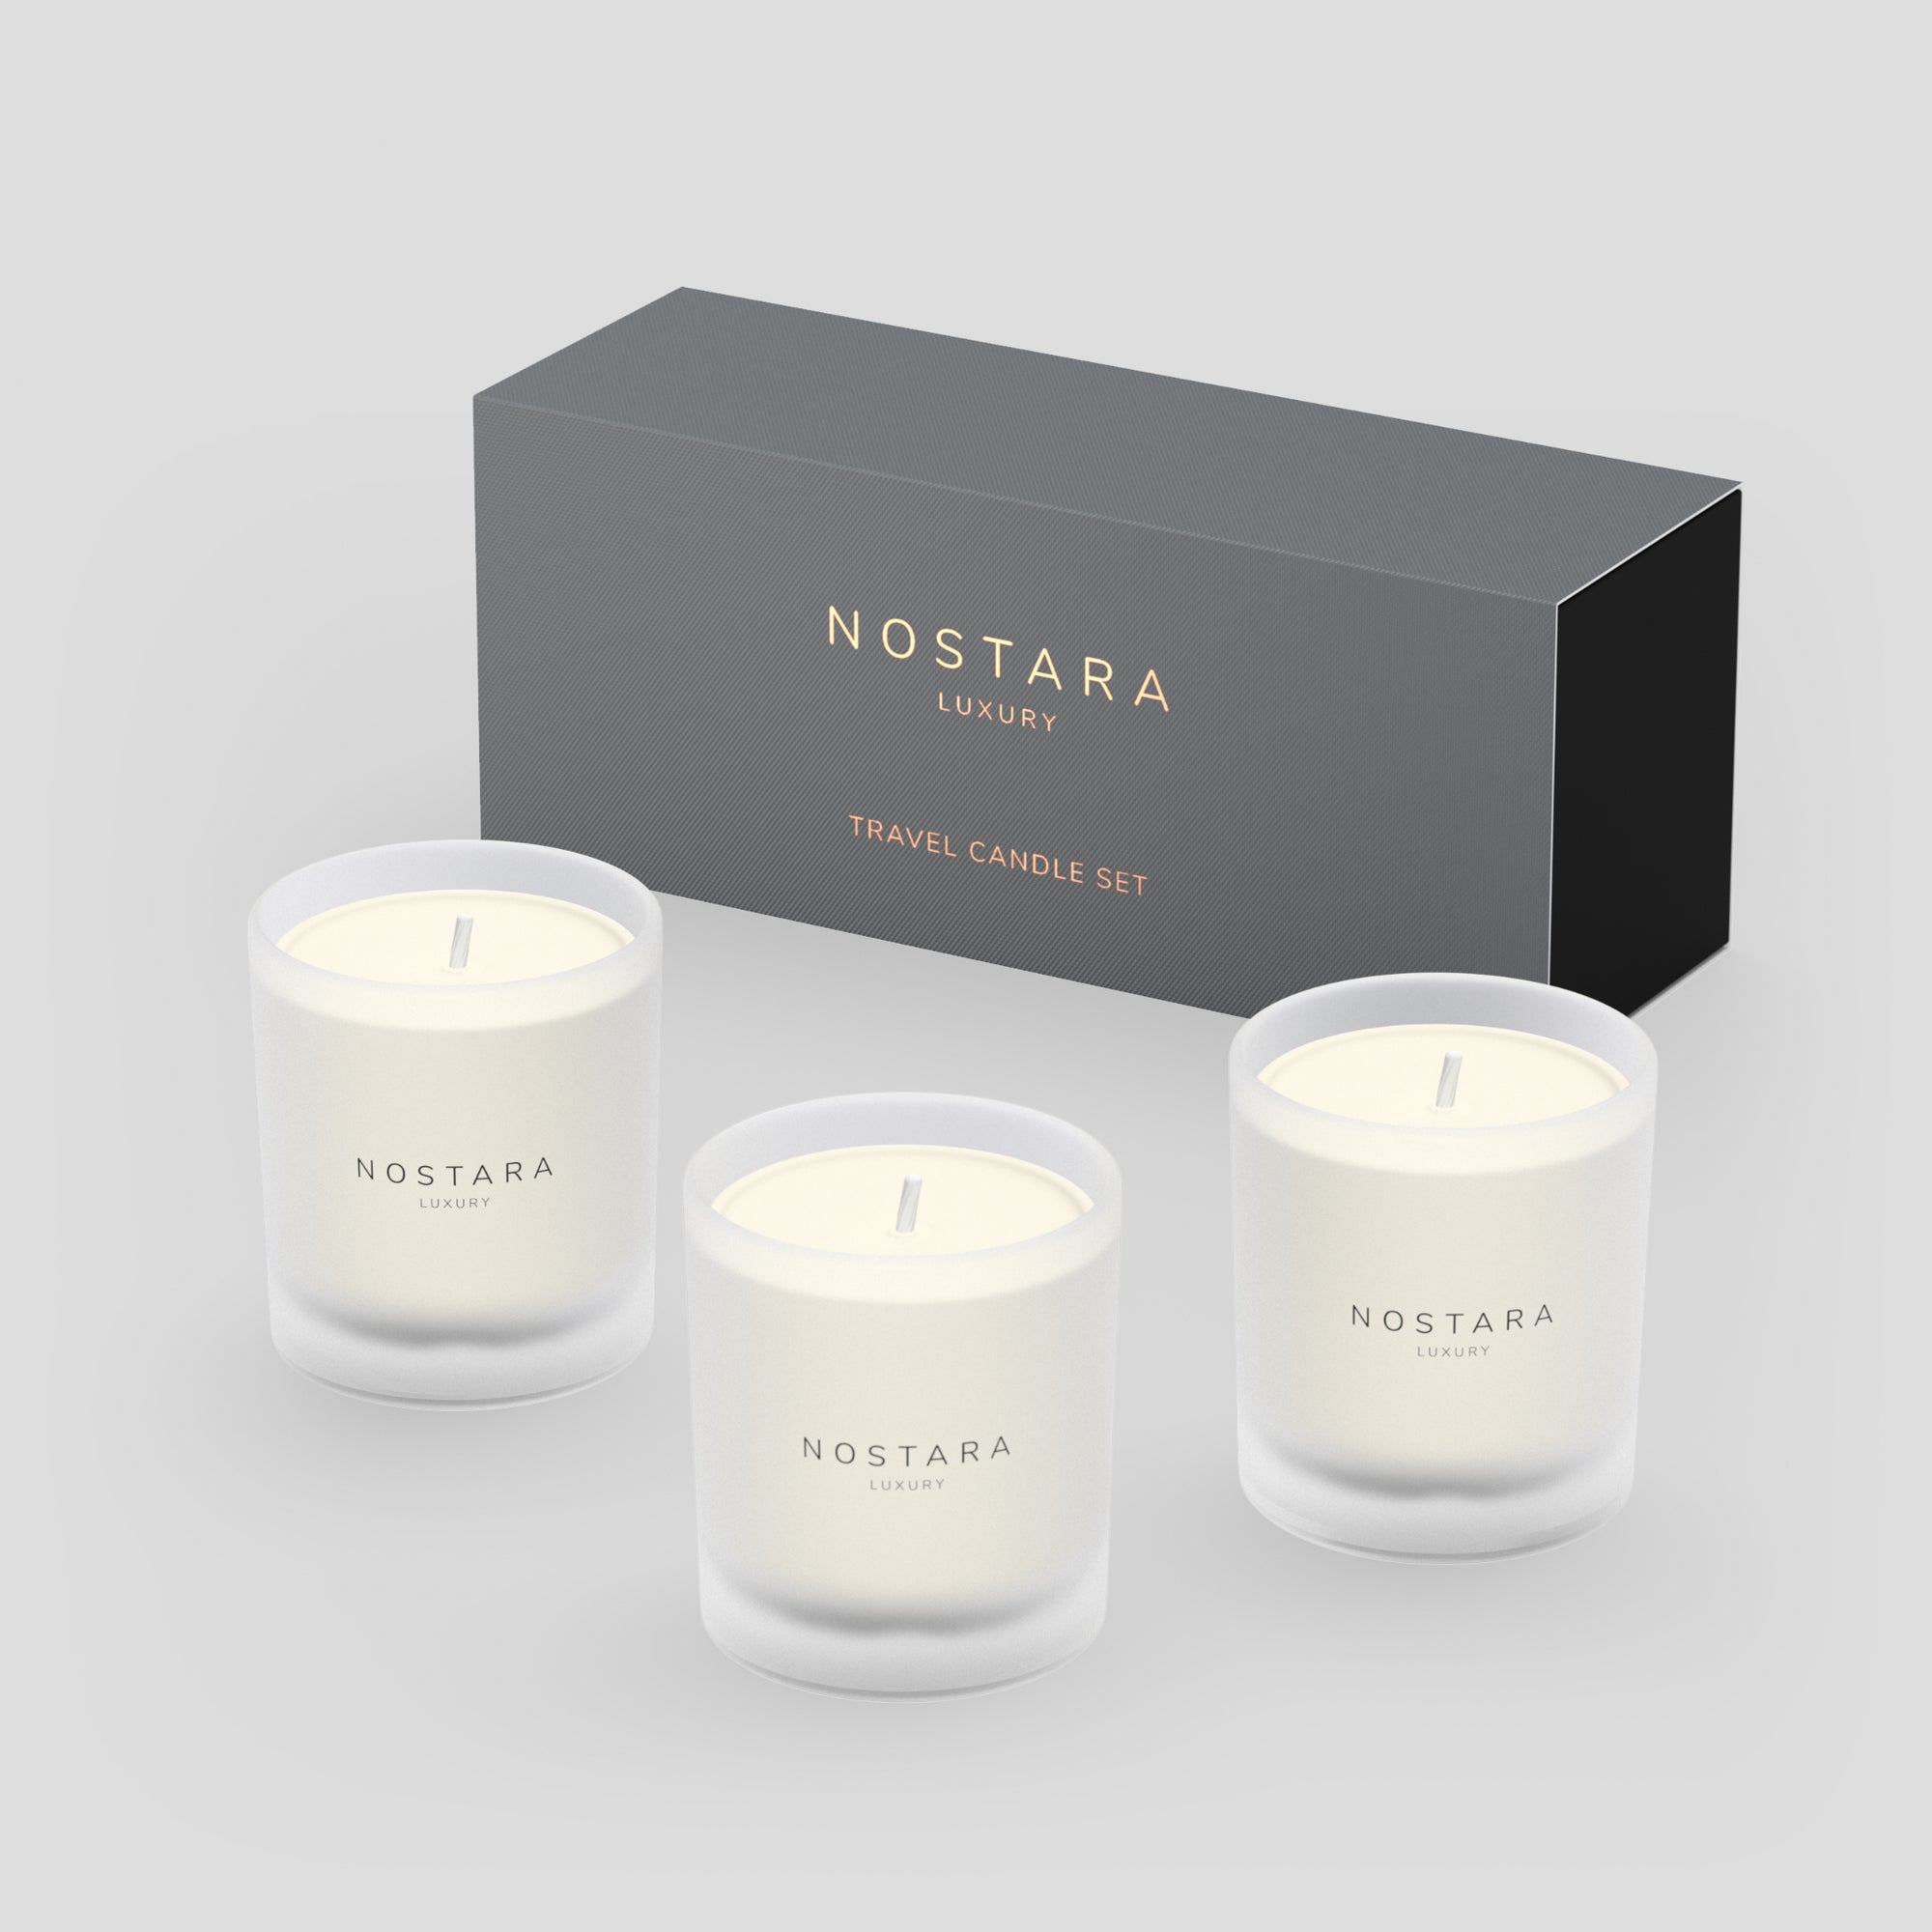 Nostara Home Fragrance Christmas Xmas Gift Set Box Images with 3 travel candles